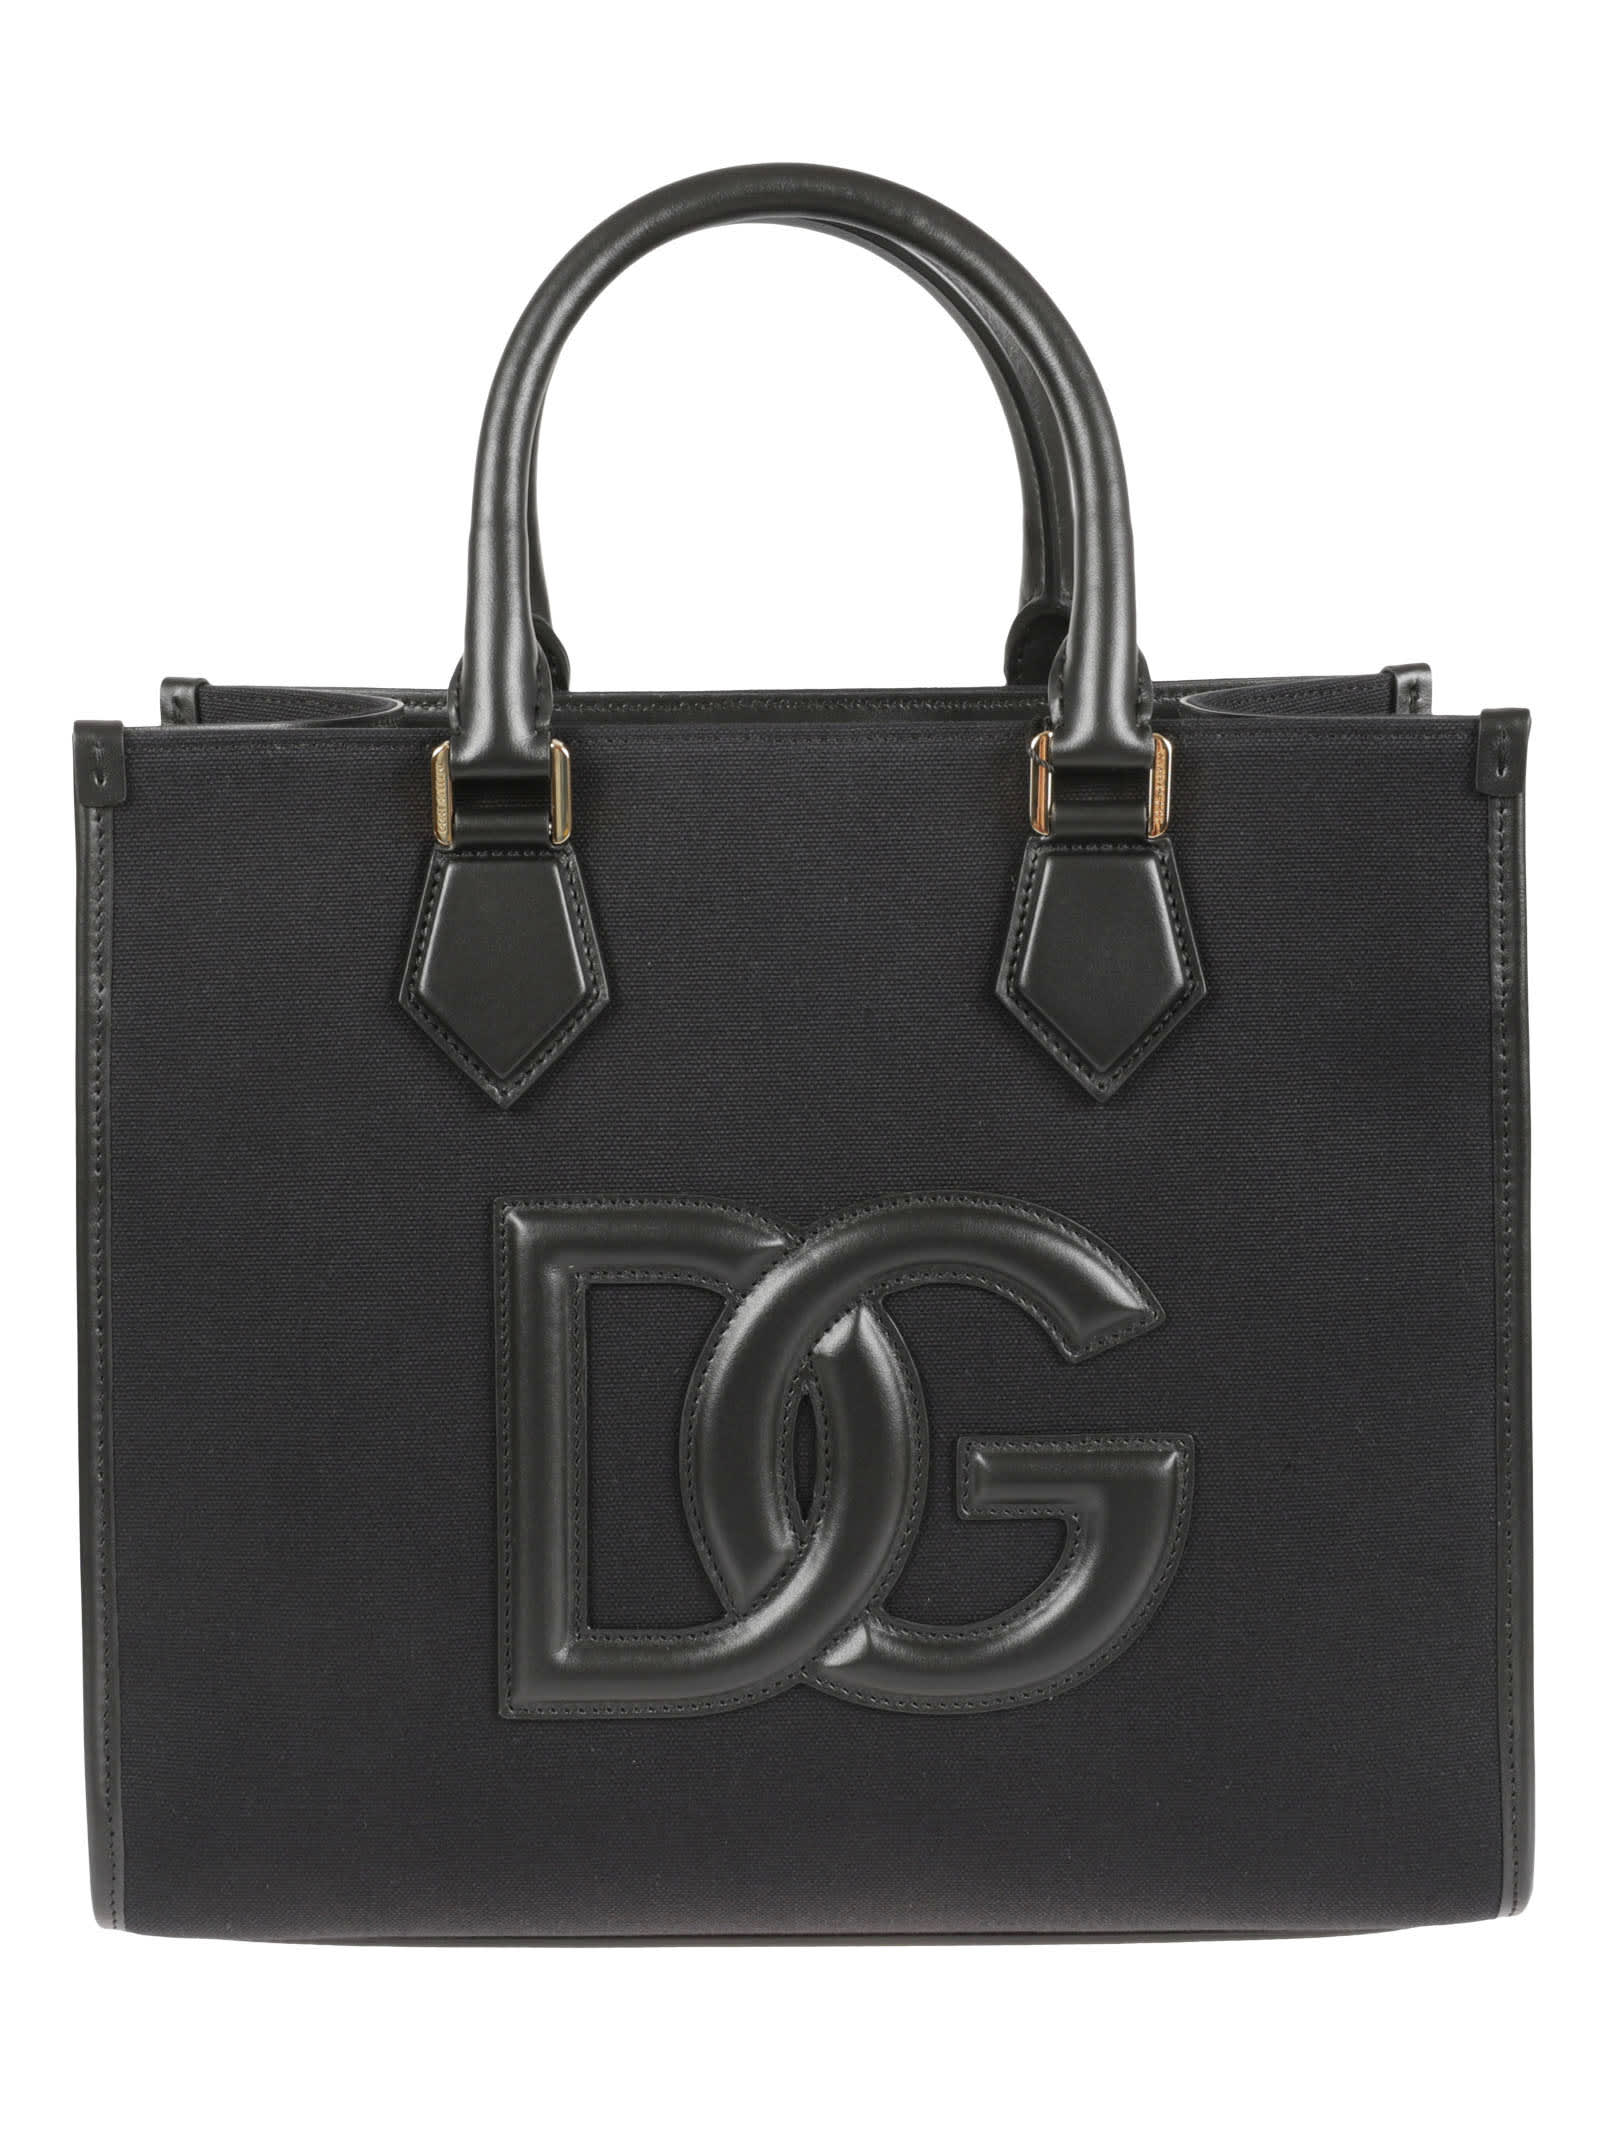 DOLCE & GABBANA DG PATCHED LOGO TOTE